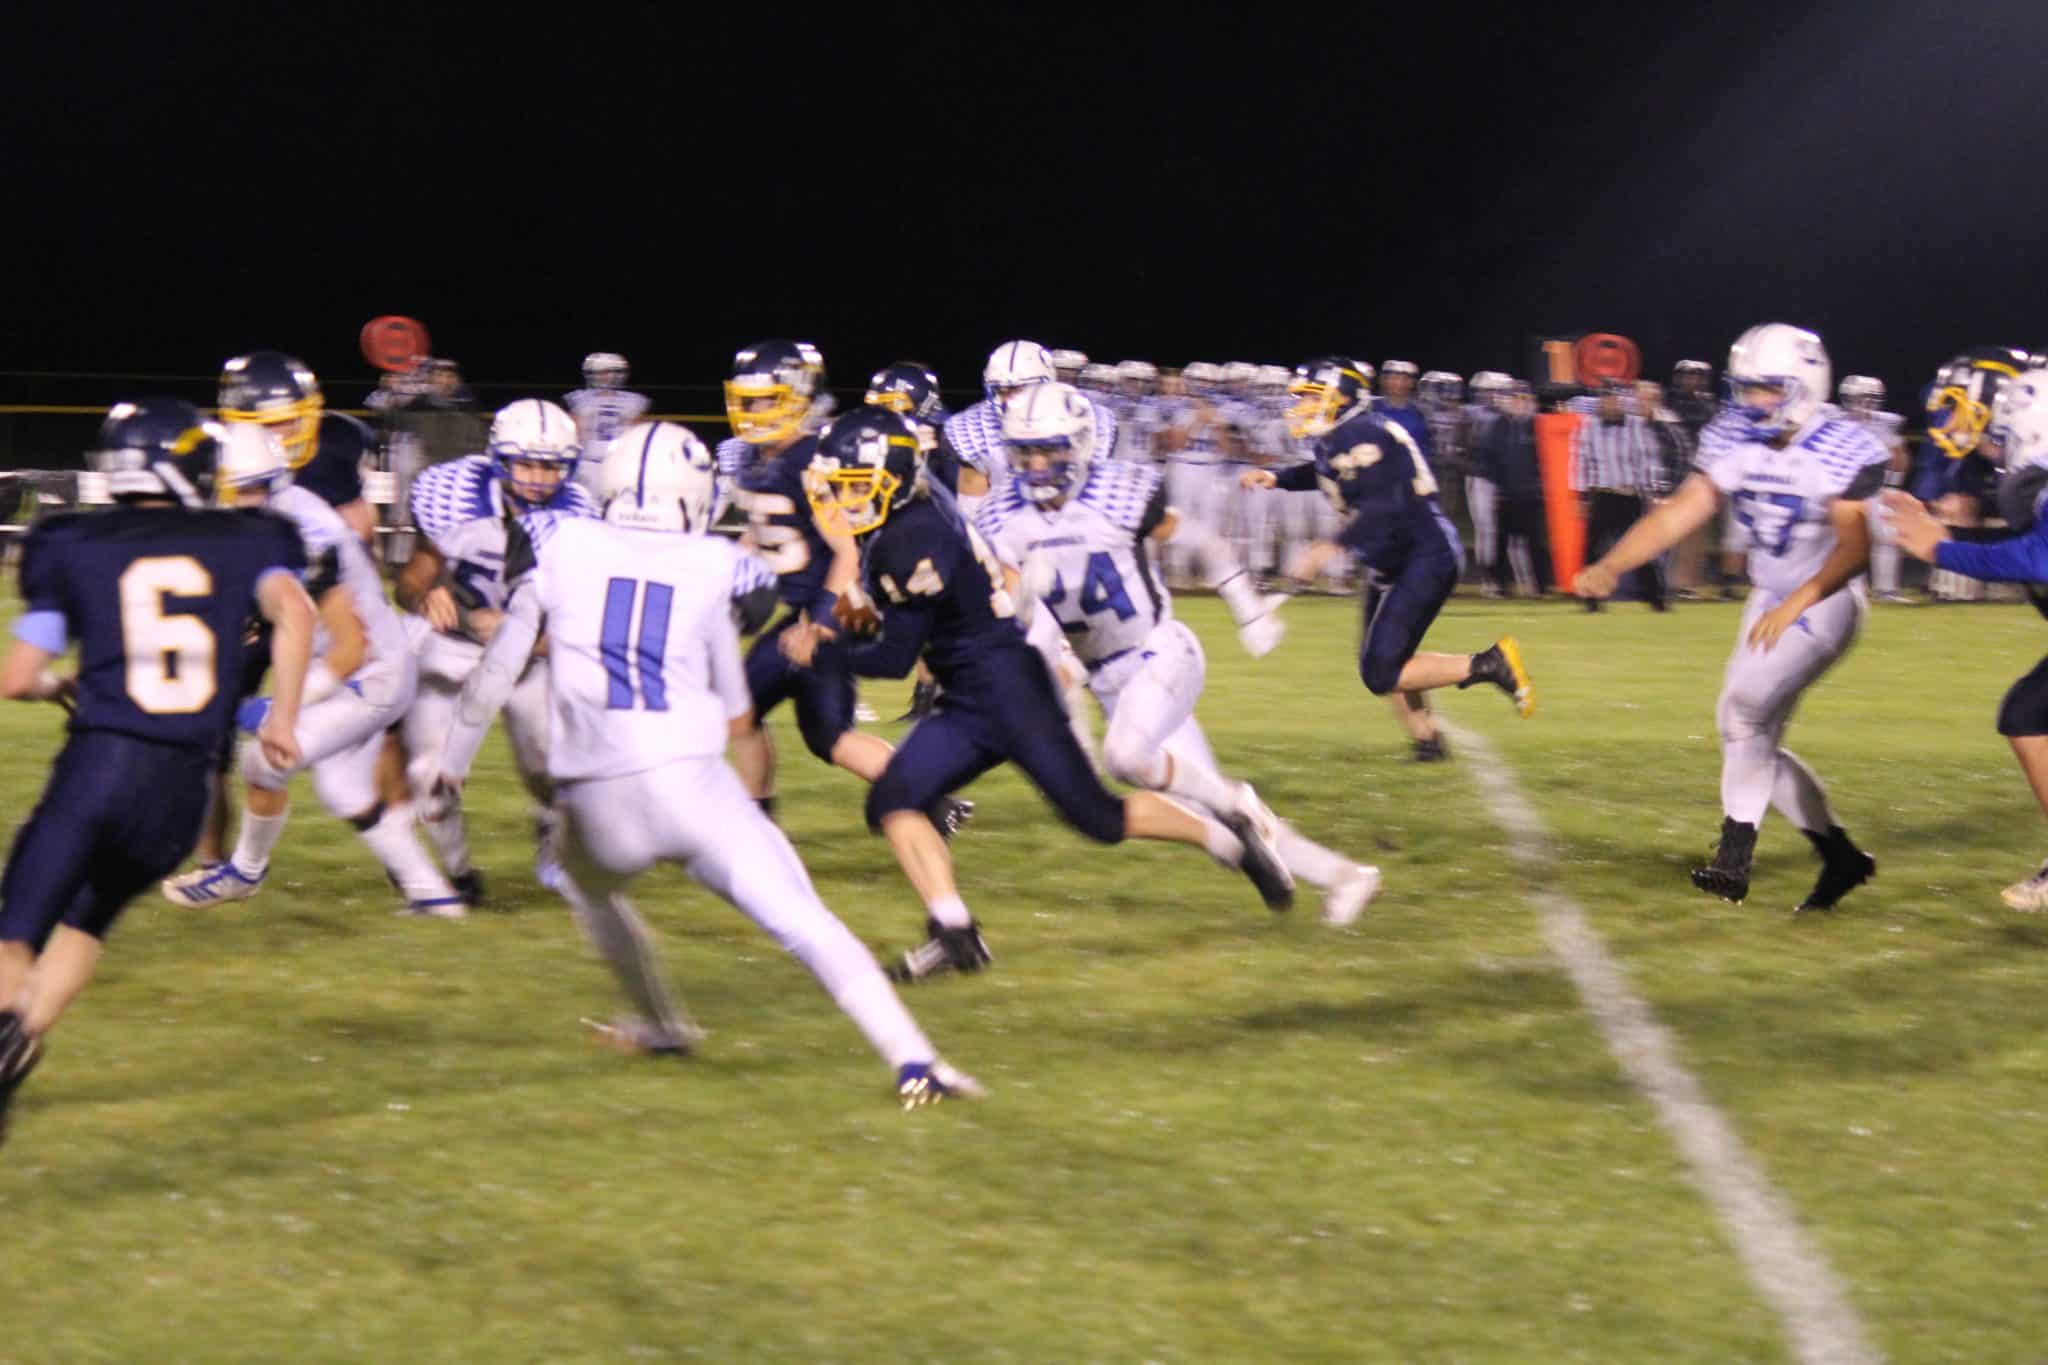 Hatchets can’t slow Hurley run game in 47-8 loss